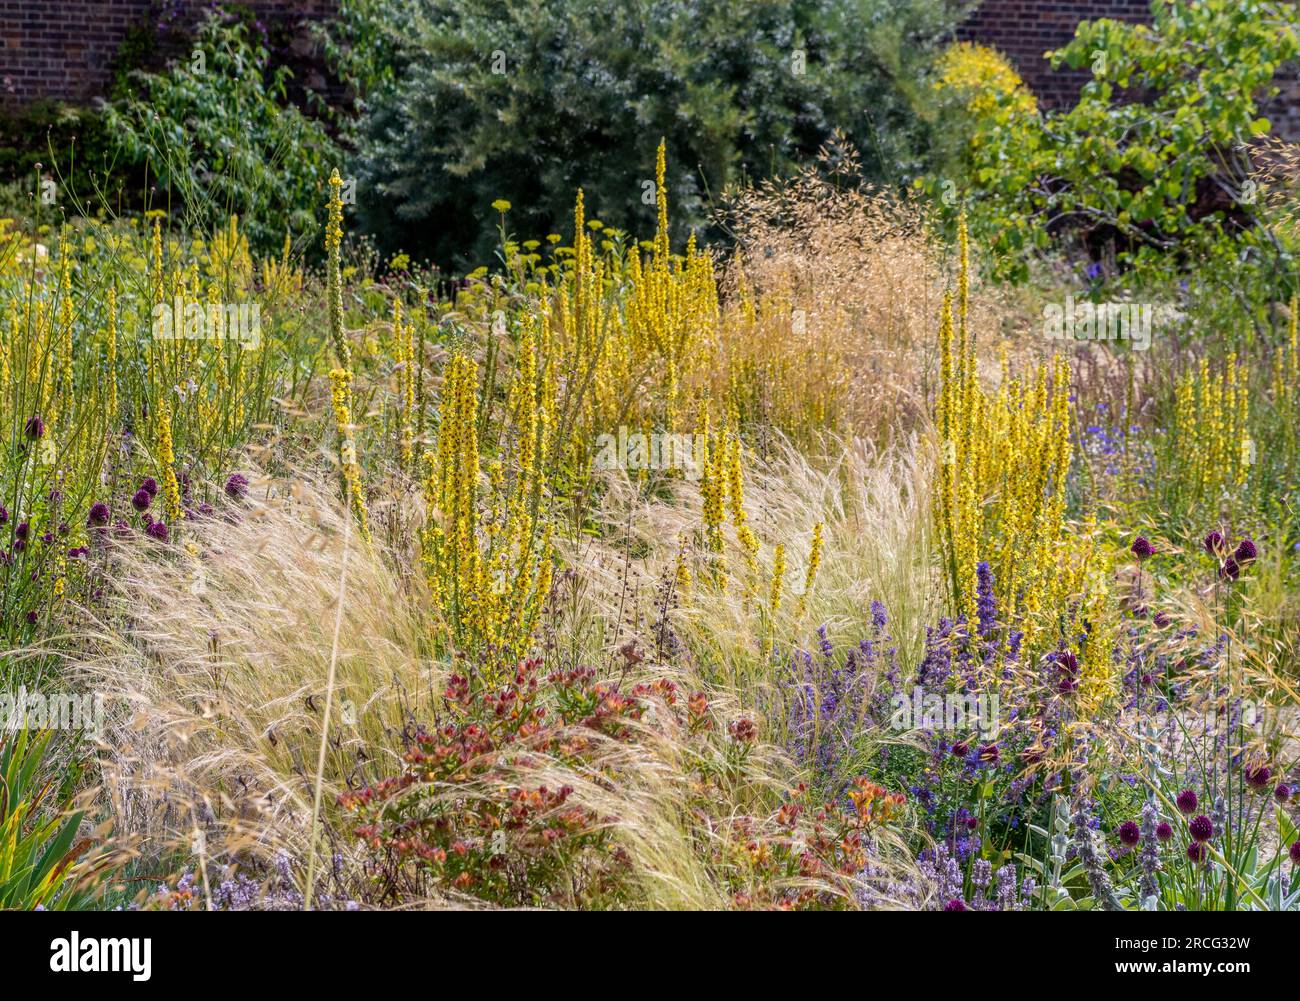 Prairie-style planting comprising of verbascums, salvias, aliums, and ornamental grass. Stock Photo